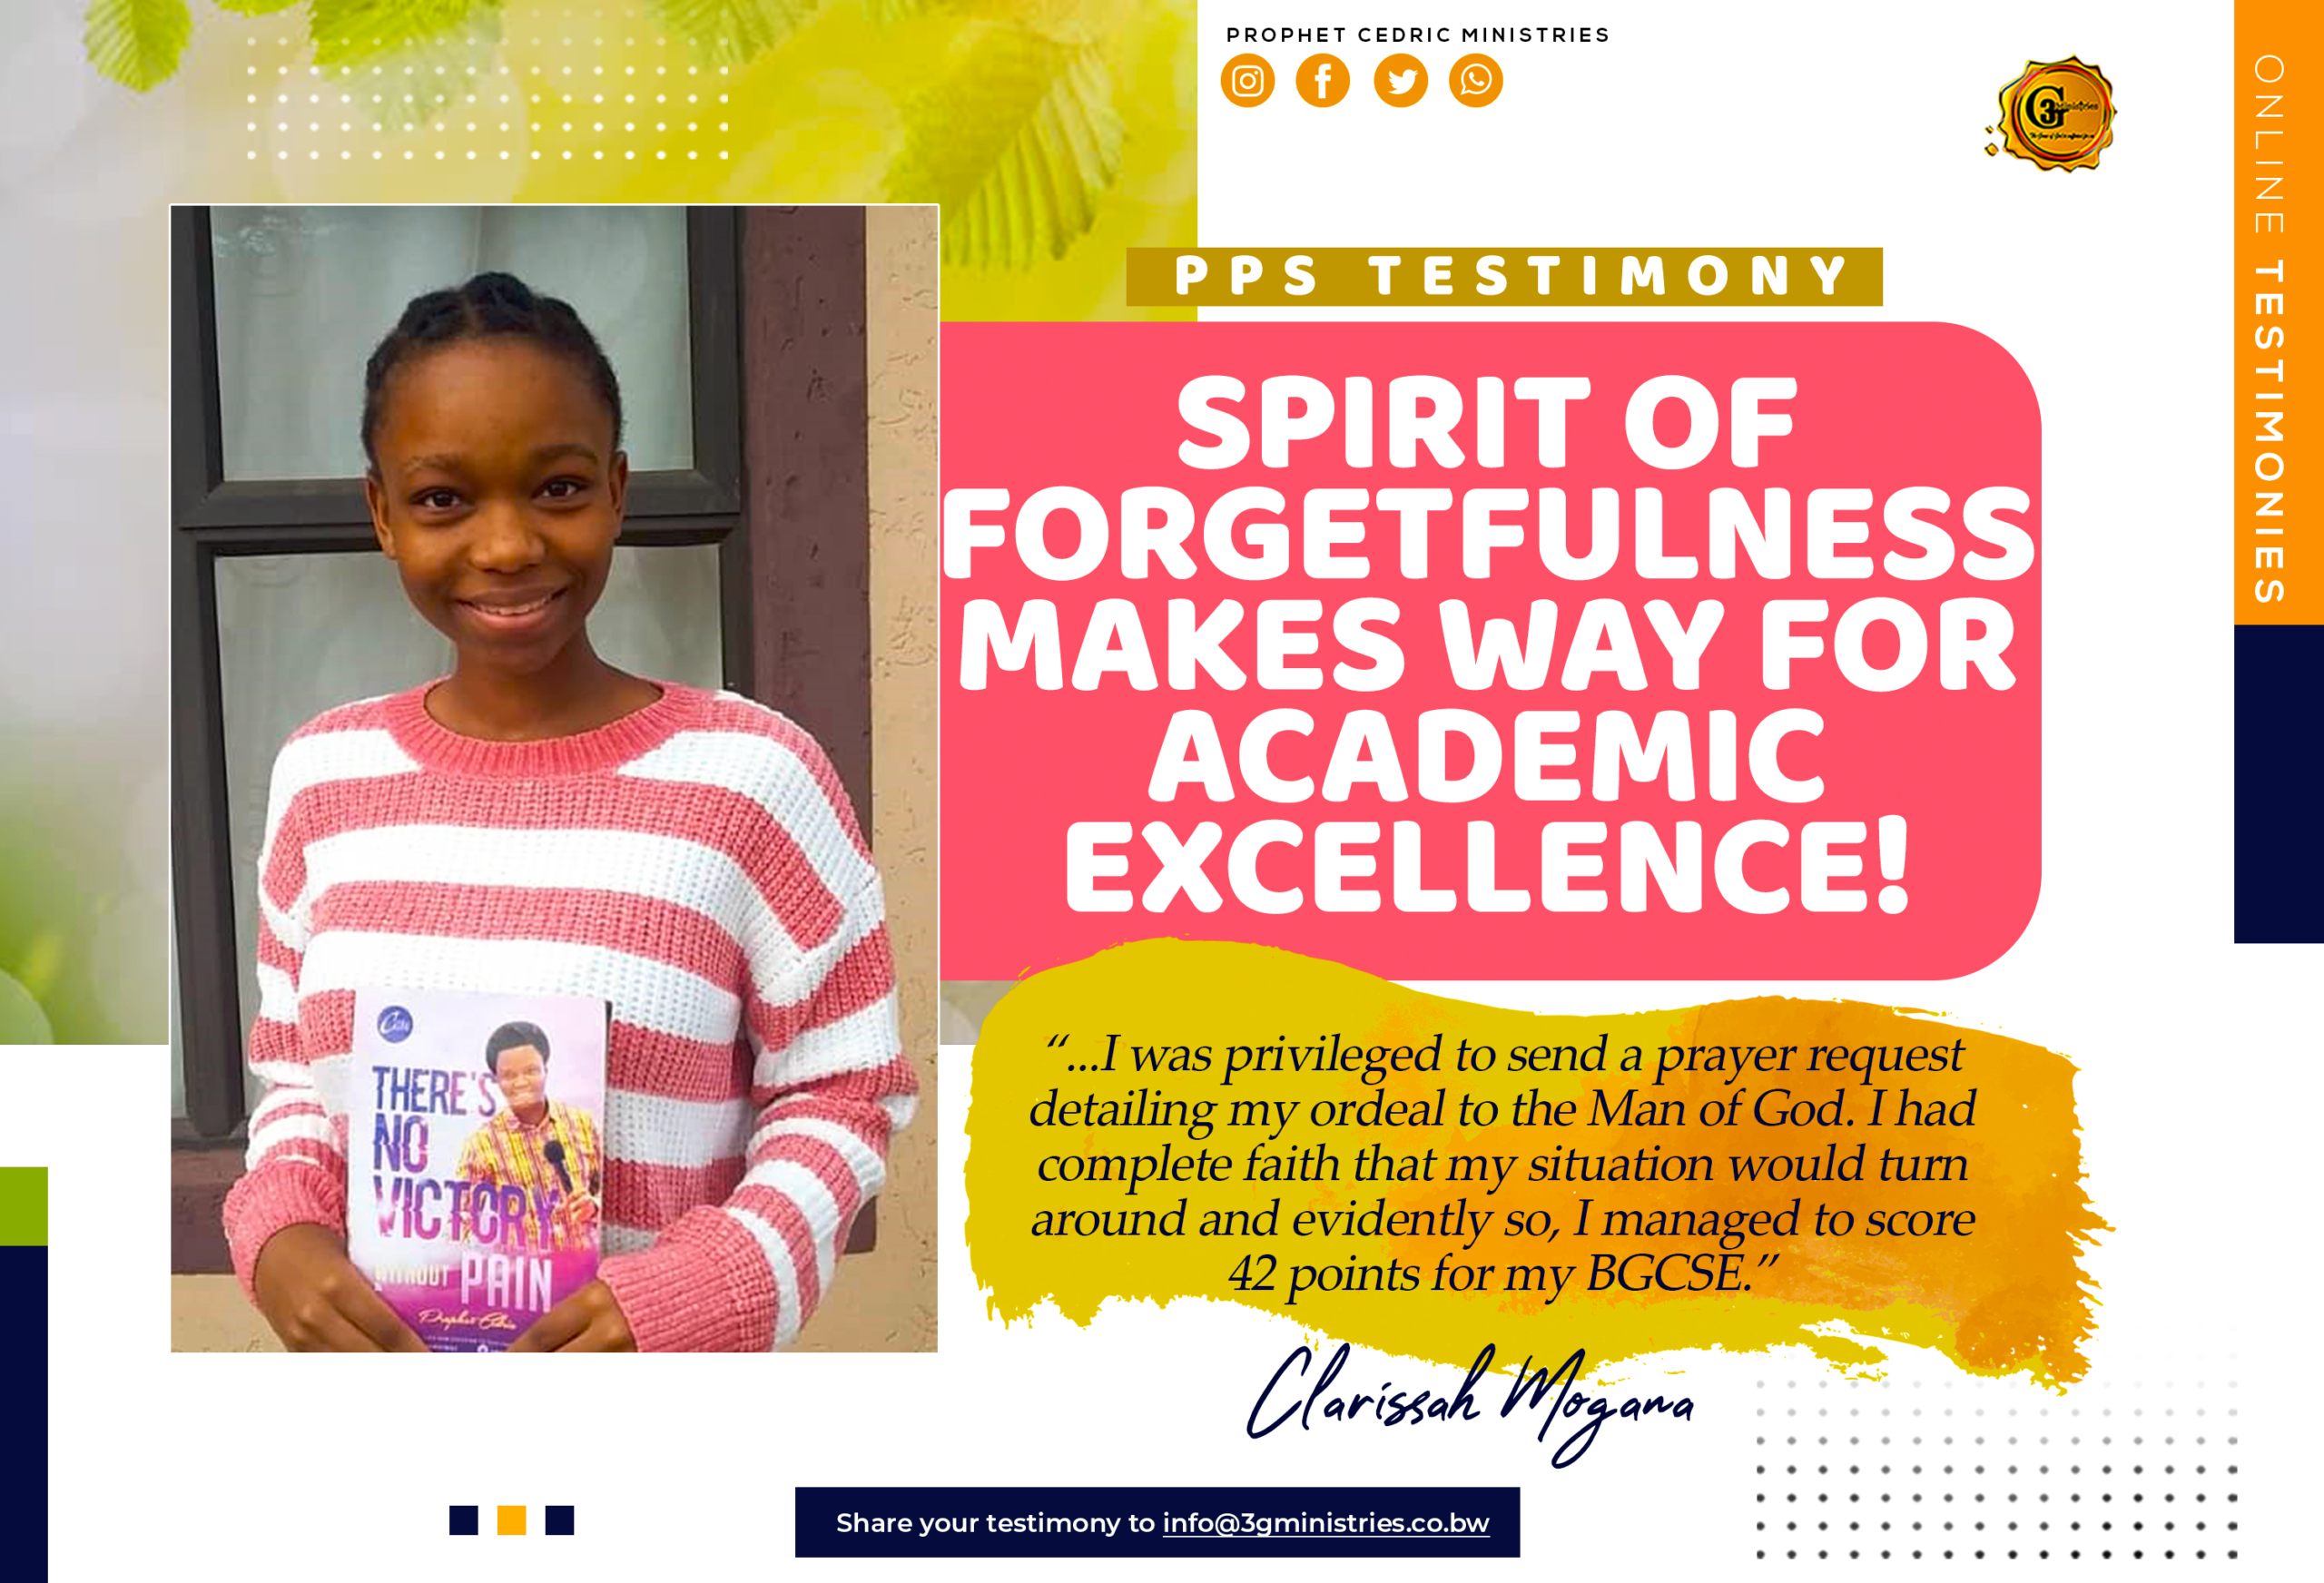 SPIRIT OF FORGETFULNESS MAKES WAY FOR ACADEMIC EXCELLENCE!